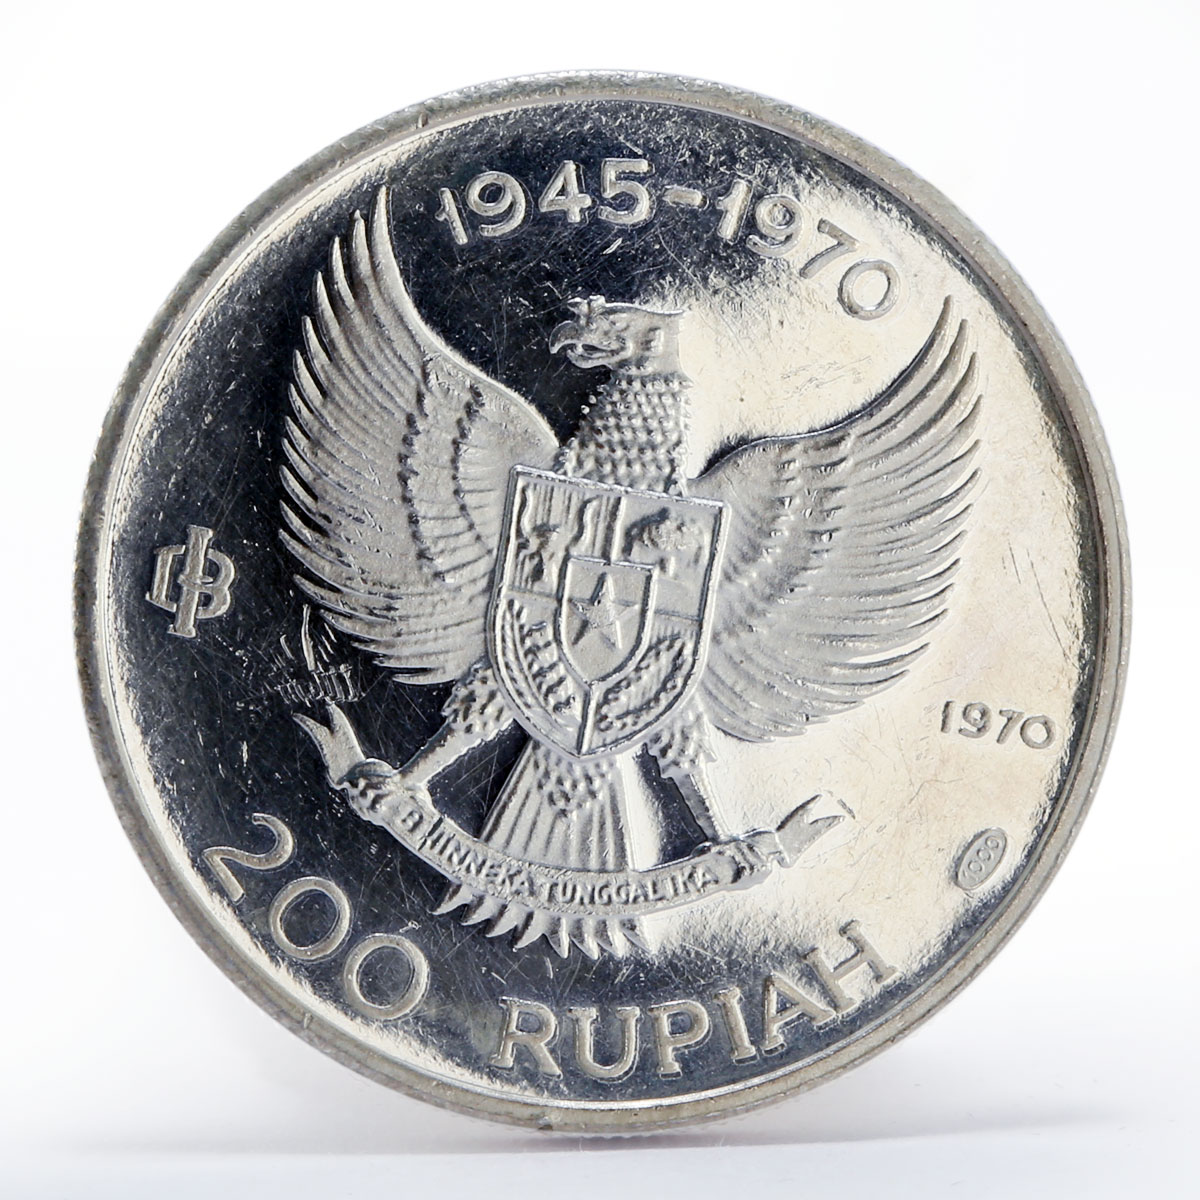 Indonesia 200 rupiah 25th Anniversary Independence Great Bird proof silver 1970